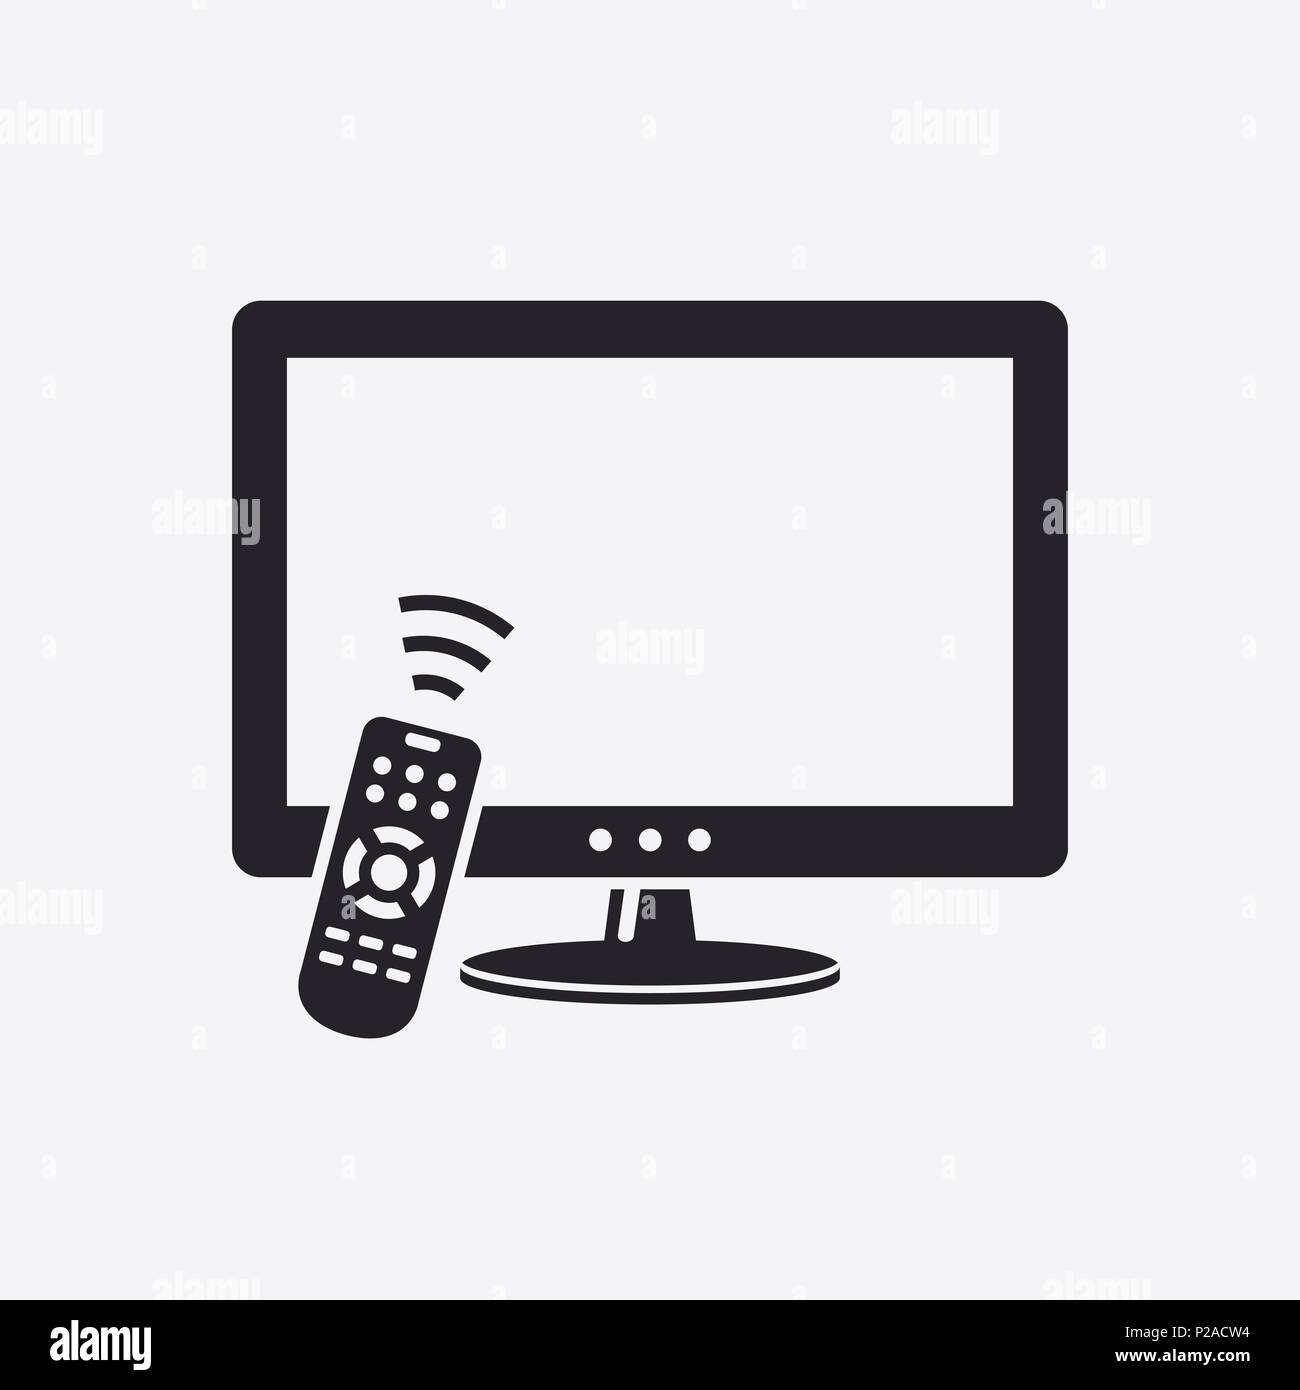 Modern LCD TV with remote control icon. Vector illustration. Stock Vector